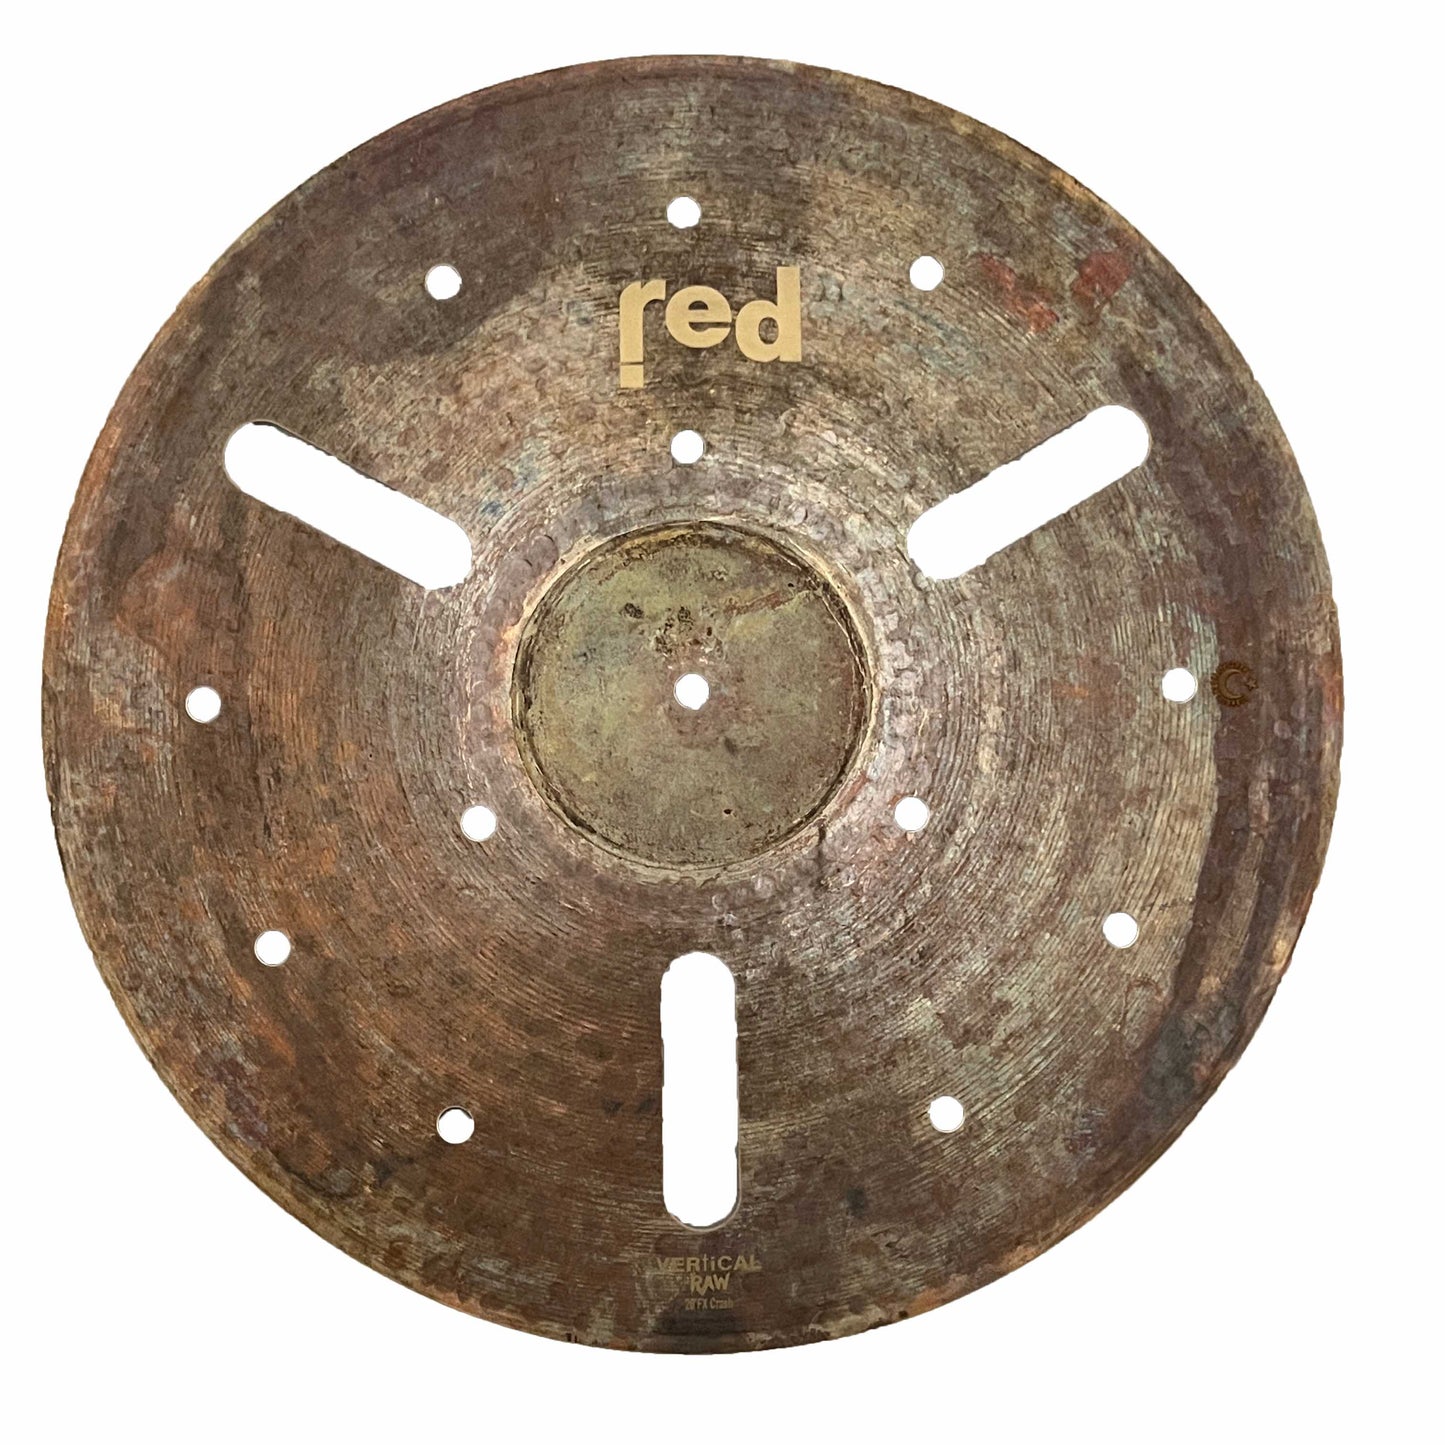 Red Cymbals Vertical Raw Series fx Crash Cymbal